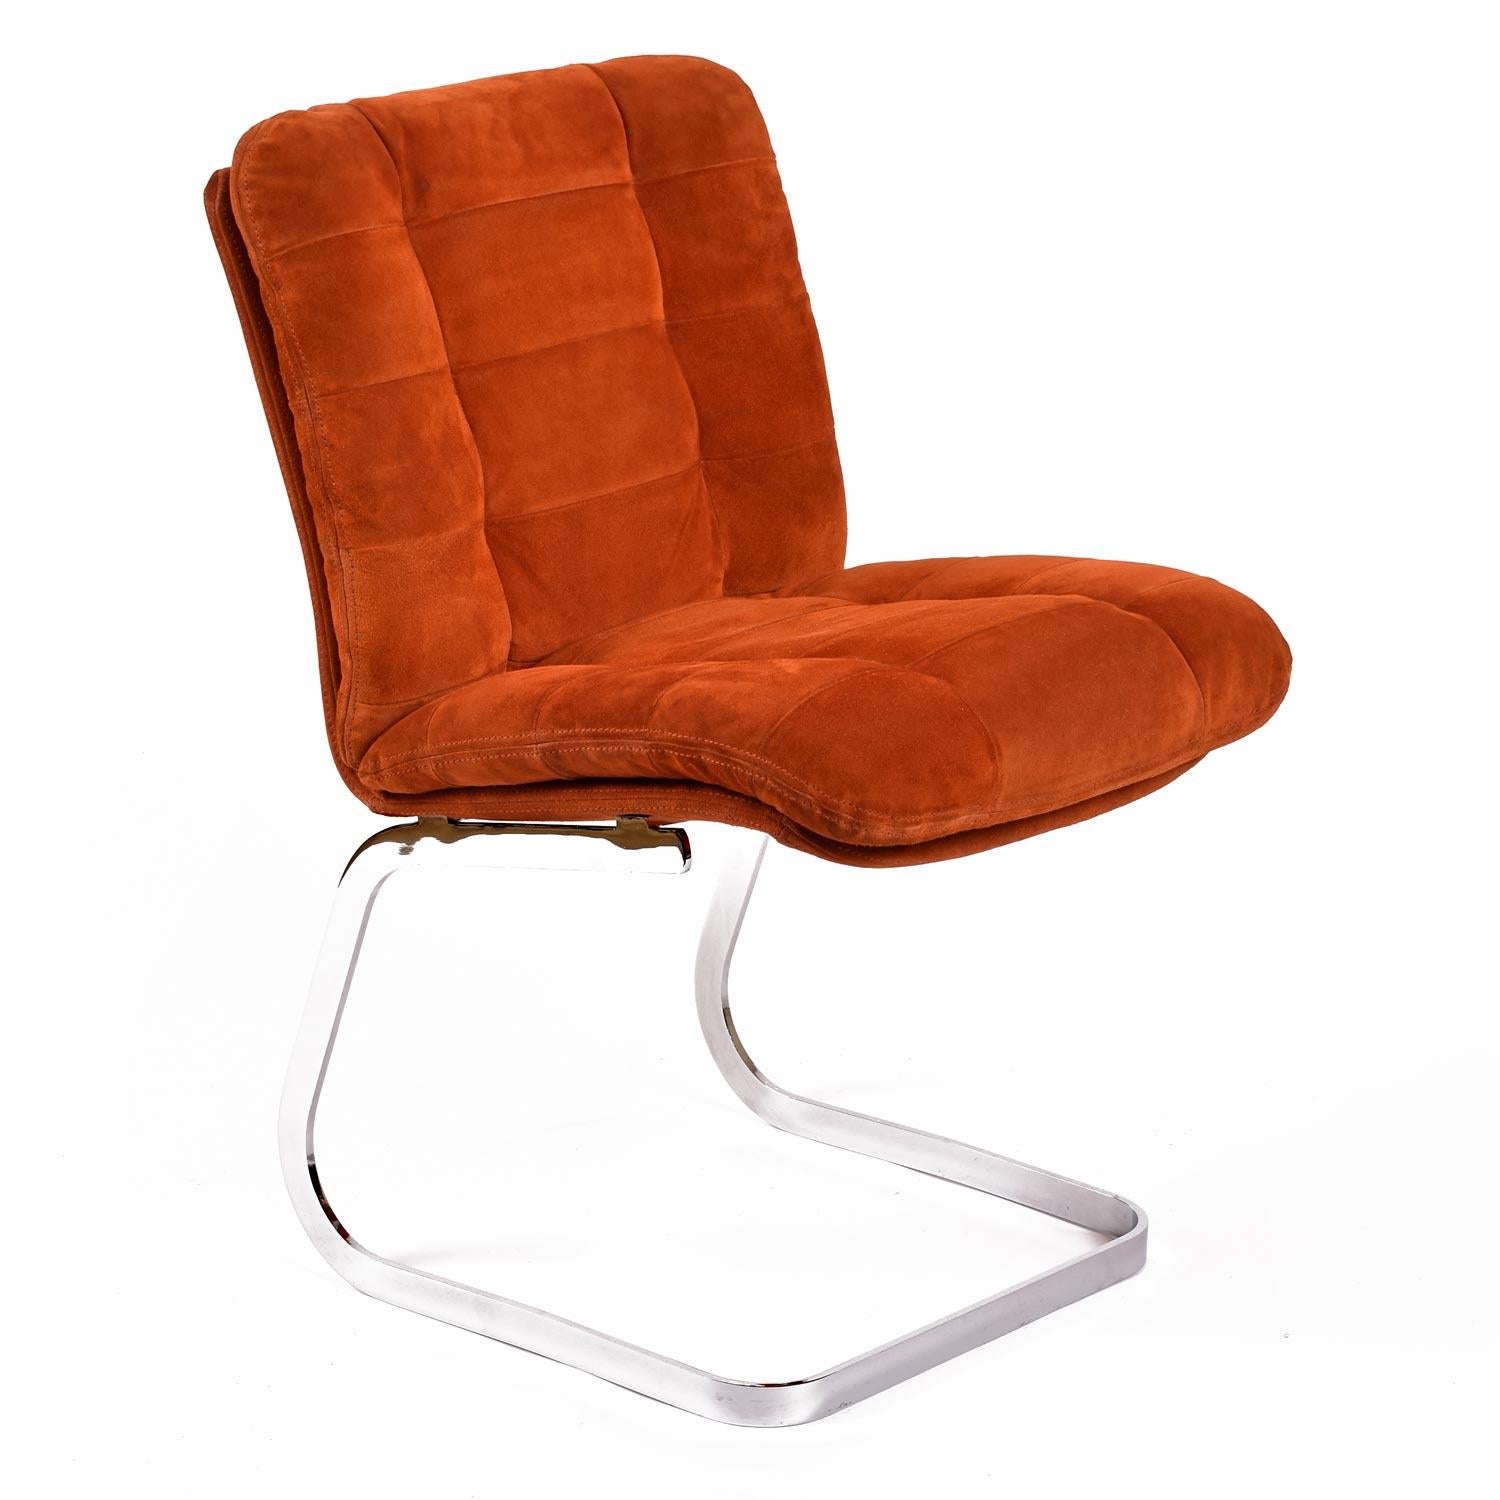 We just had these professionally cleaned and detailed. 

Original set of (6) exquisite Roche Bobois dining / side chairs. These channel tufted burnt orange suede chairs are equal parts 70's glamorous and modern. The original chrome finish has been